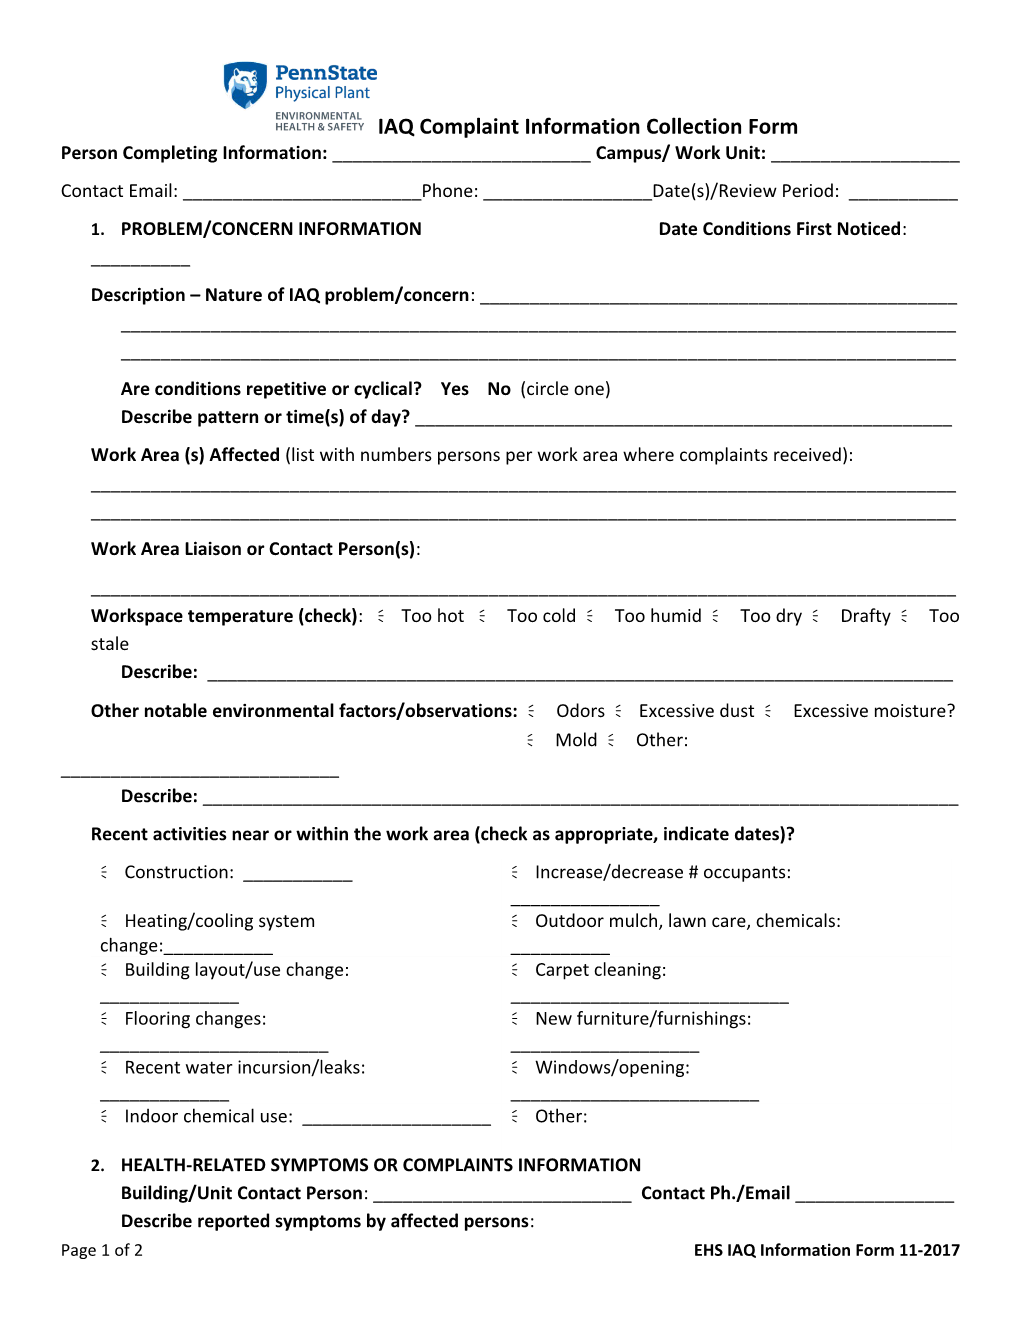 IAQ Complaint Information Collection Form